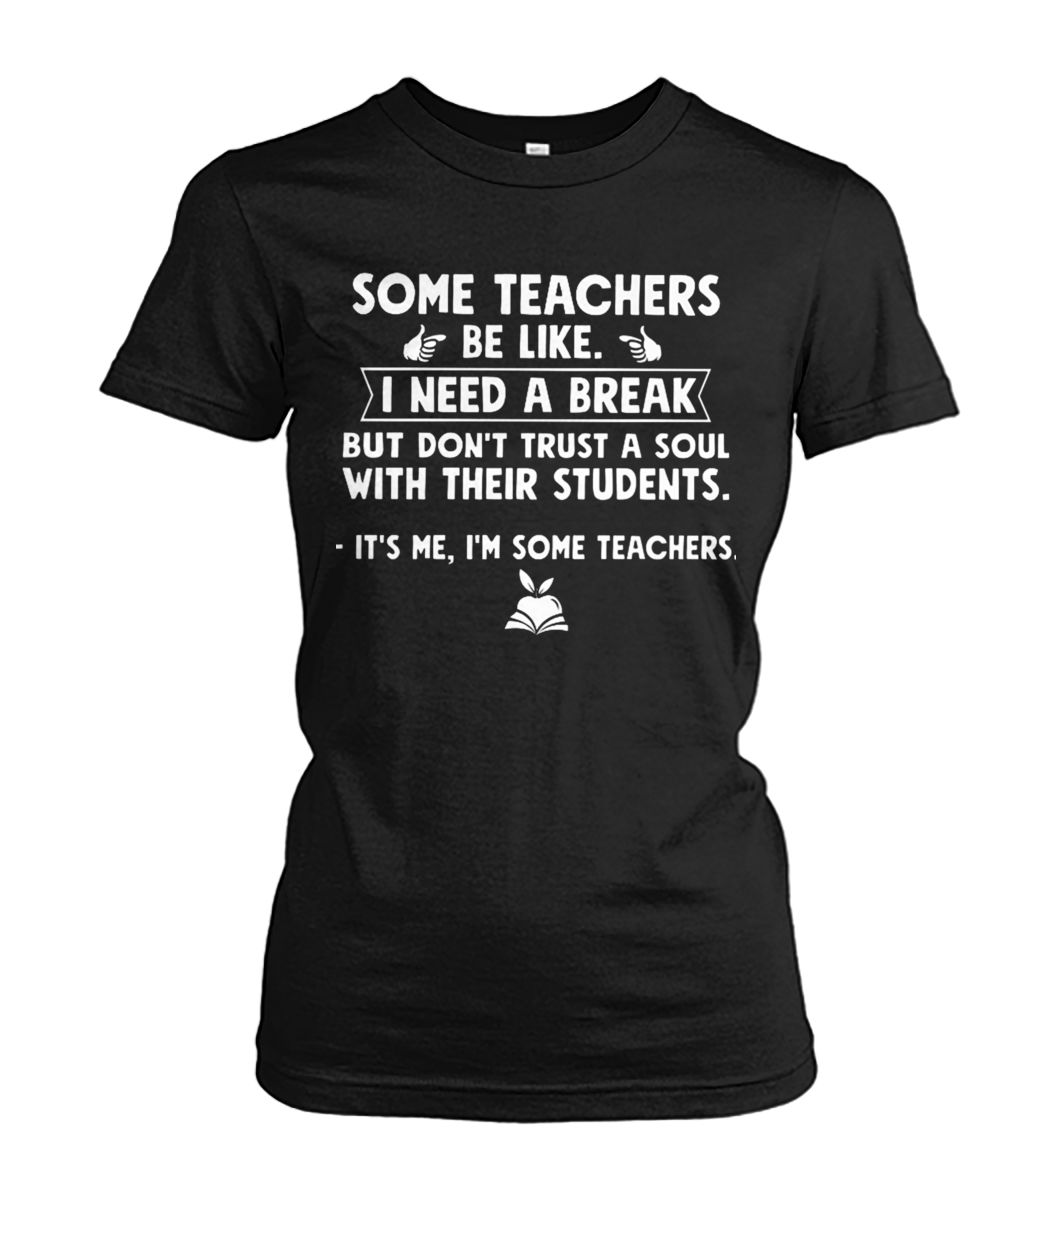 Some teachers be like I need a break but don't trust a soul with their students women's crew tee